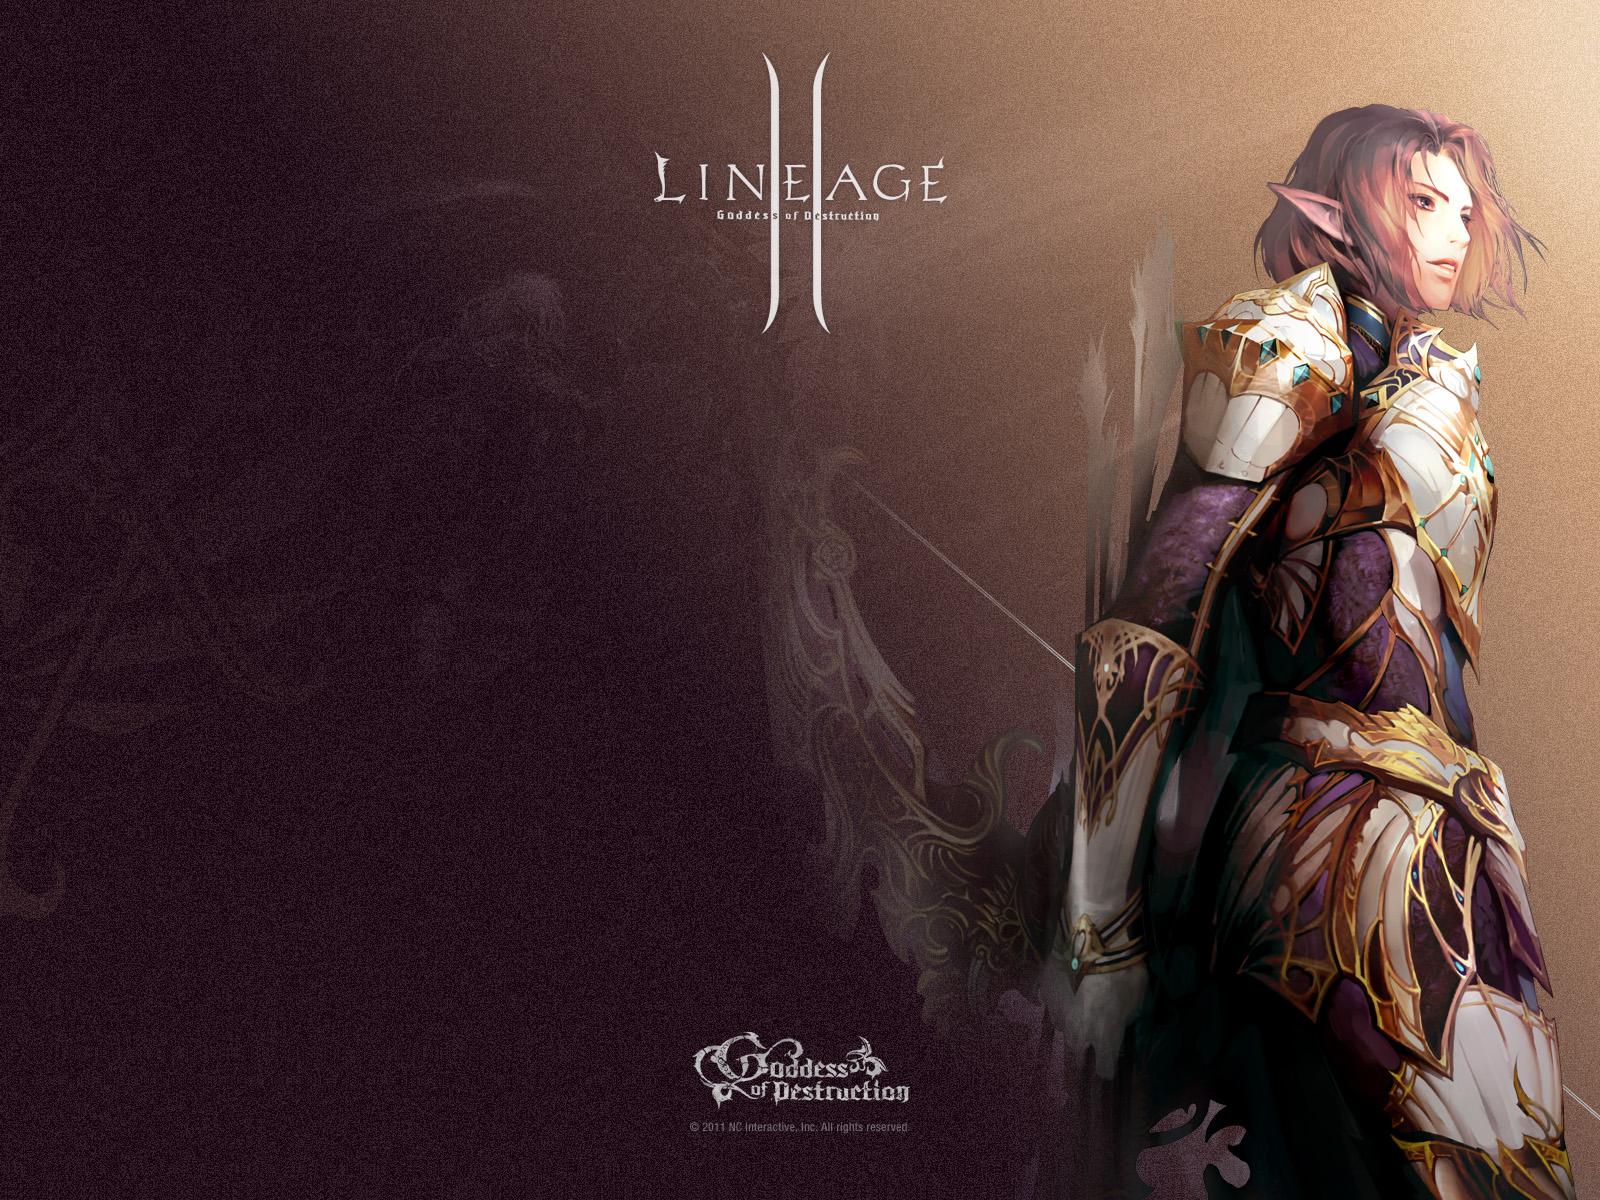 Lineage 2 Archer- Free Lineage 2: Goddess of Destruction Wallpaper